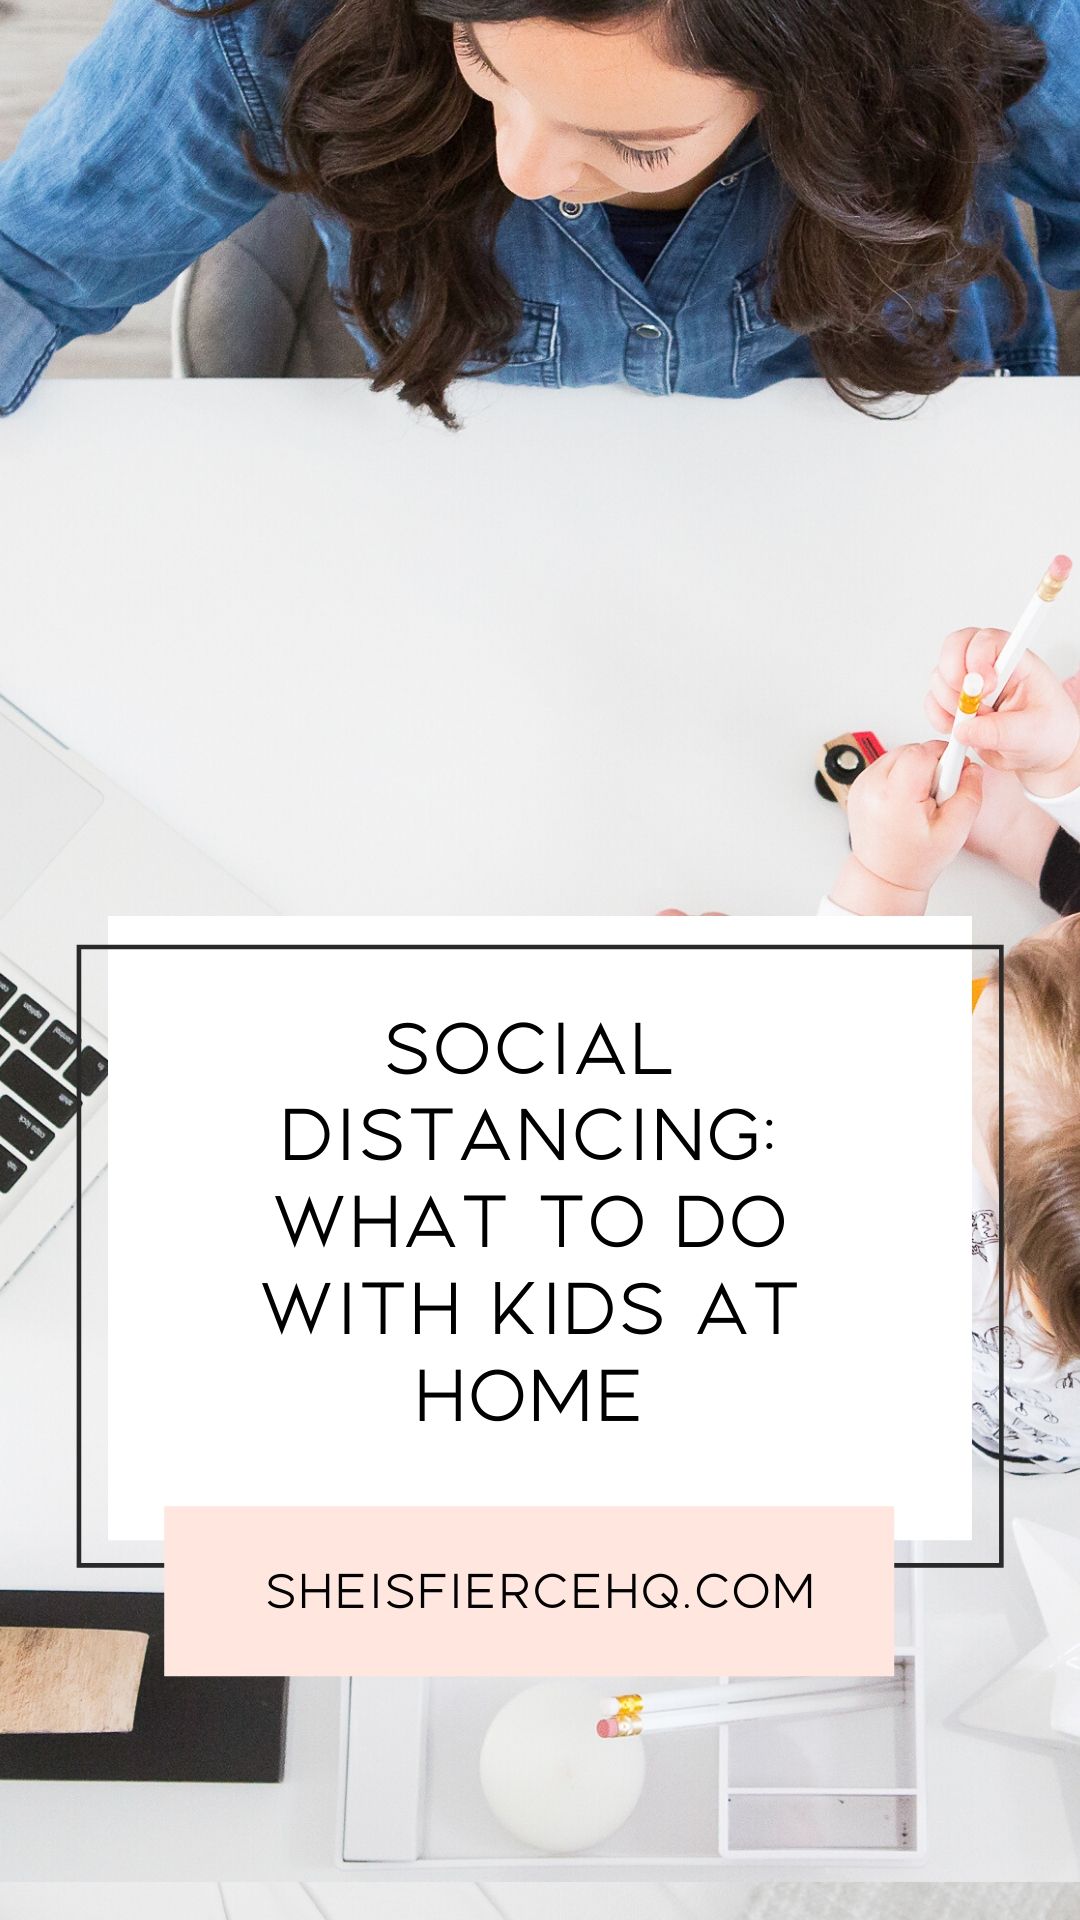 Social Distancing: What to Do with Kids at Home